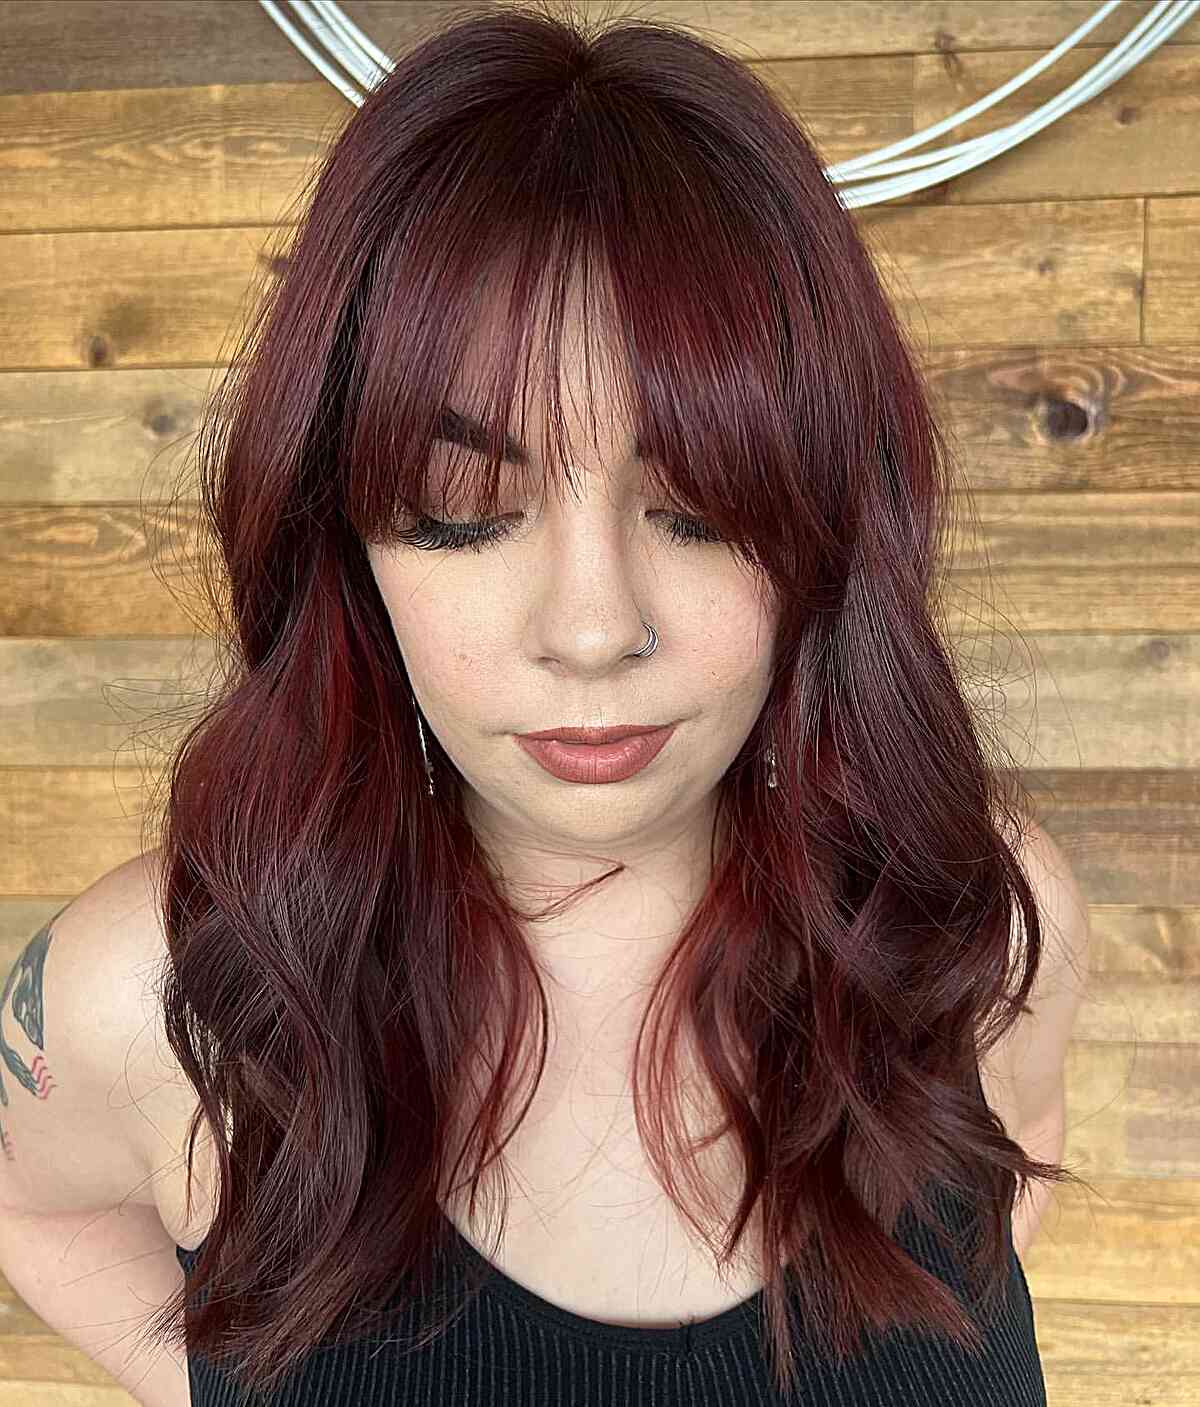 44 Mahogany Hair Color Color Ideas for a Warm Brunette Look